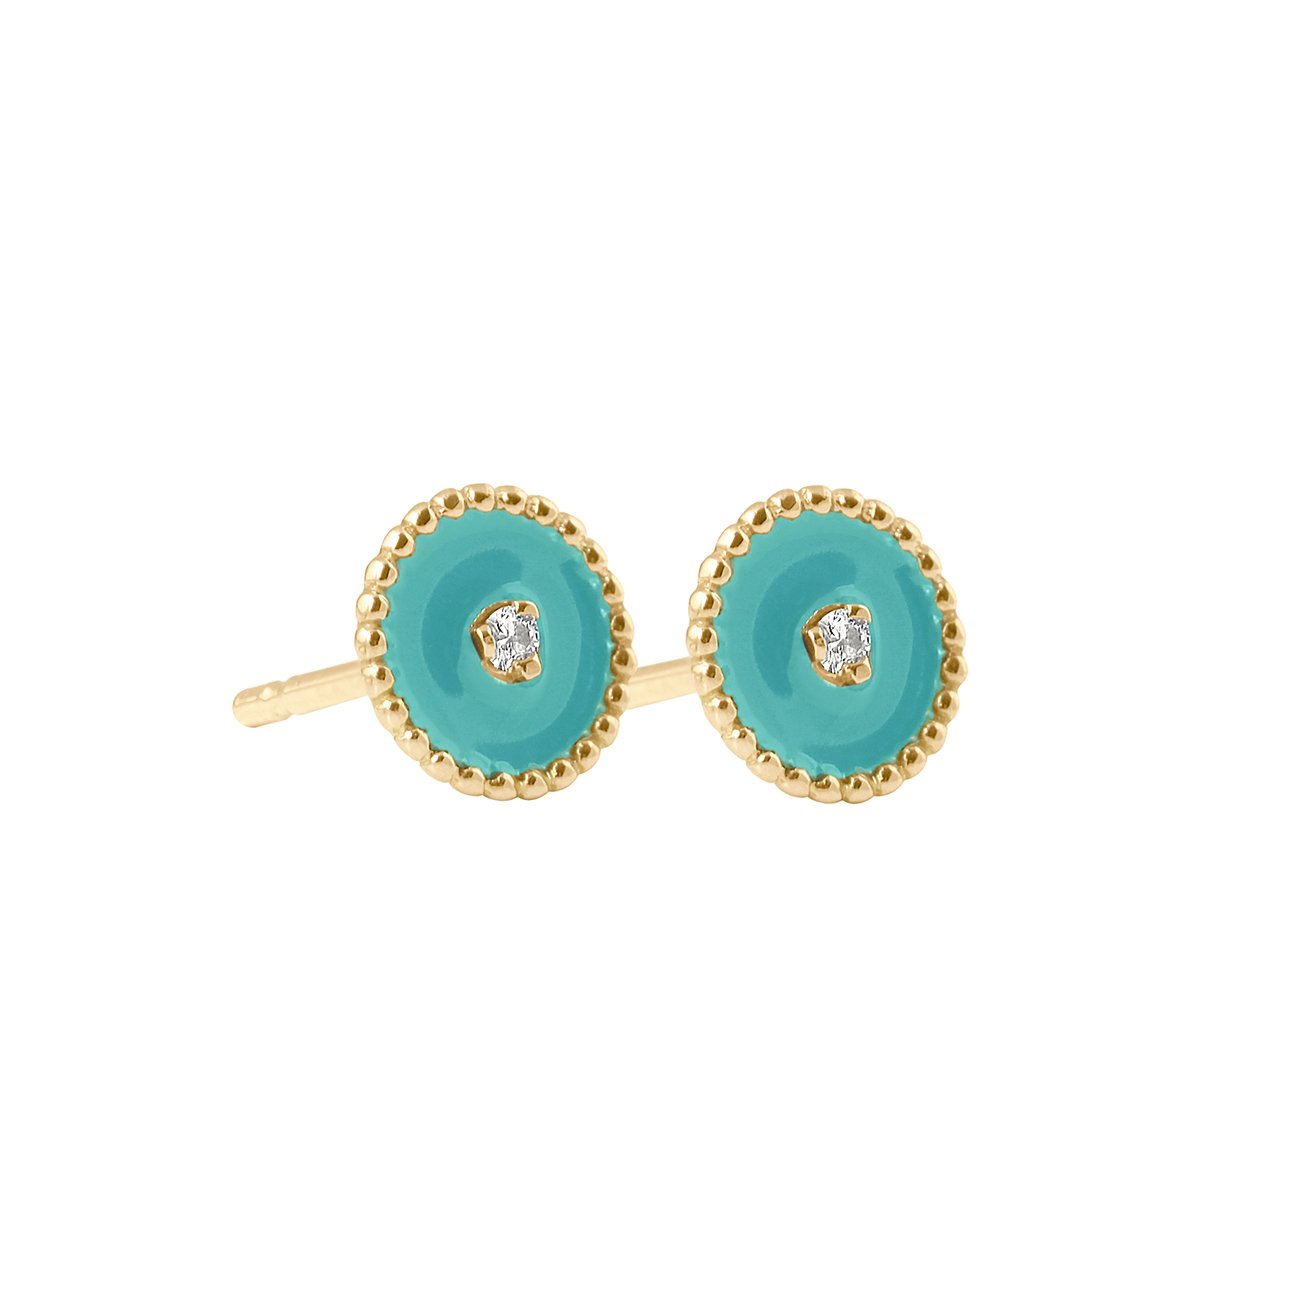 North Star, diamond Turquoise Green resin earrings, Yellow Gold